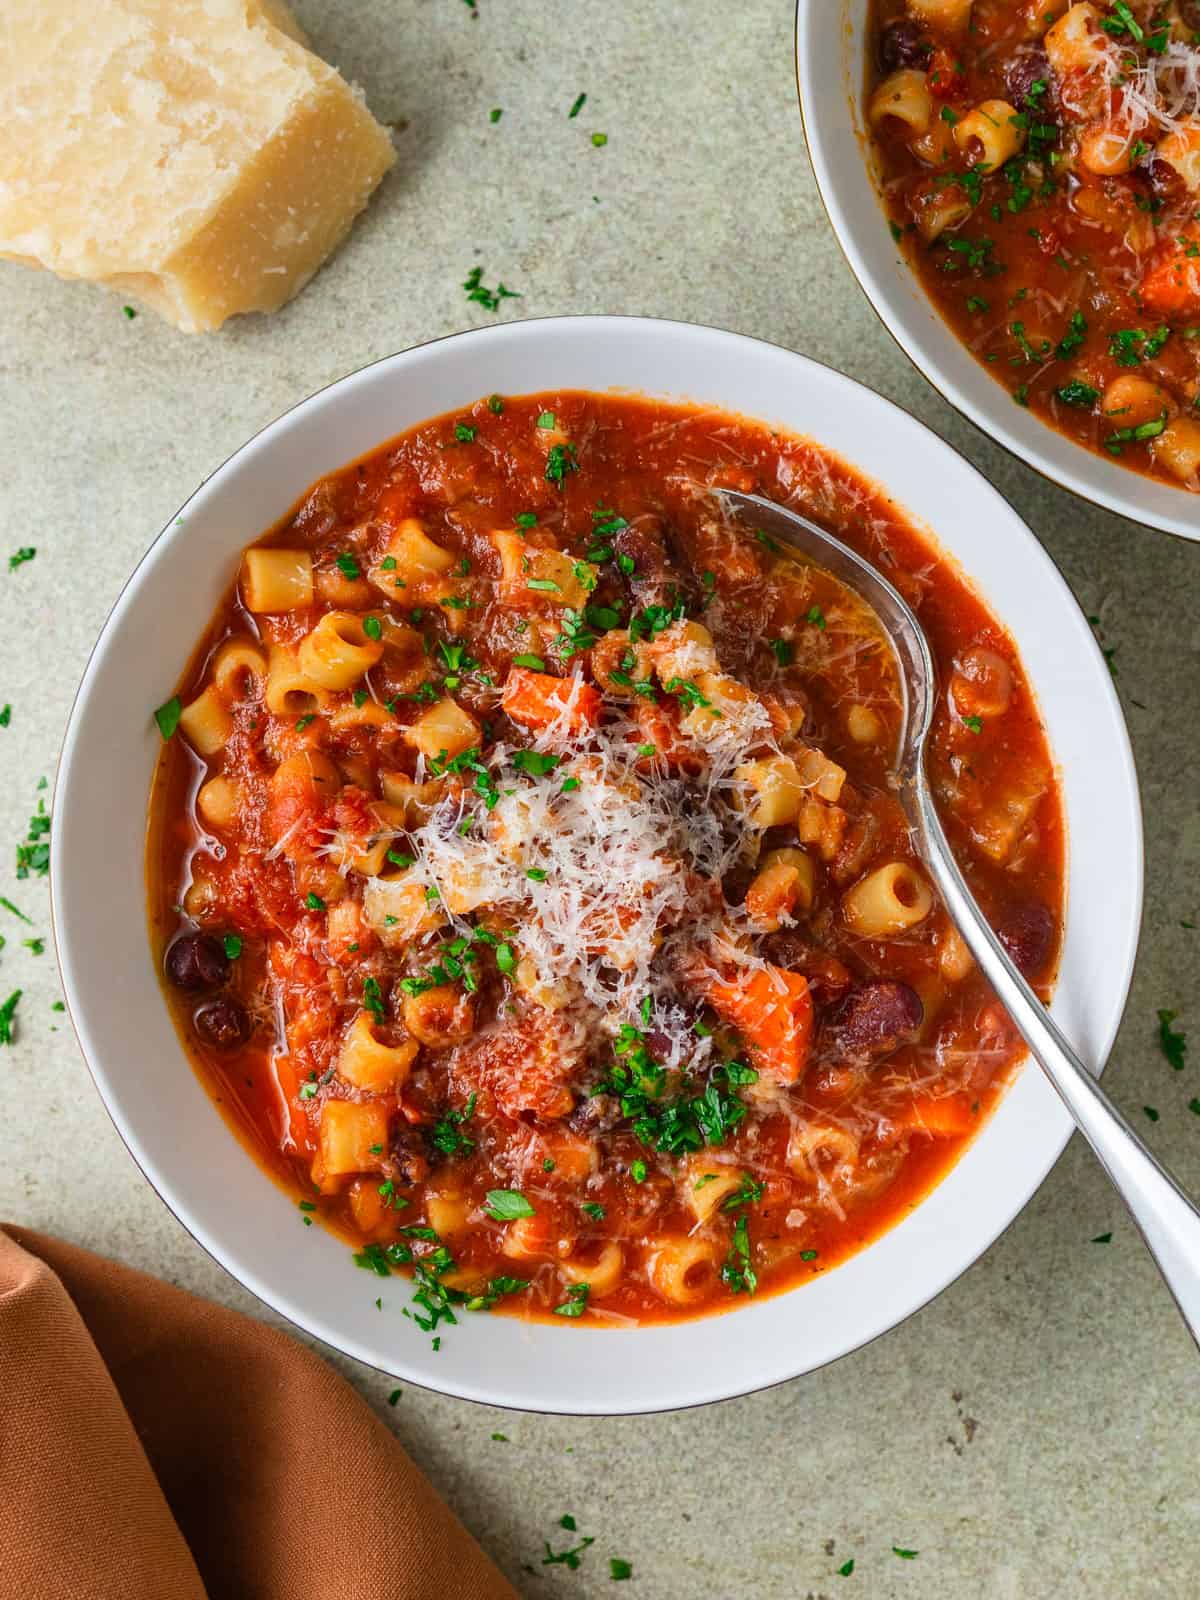 Easy recipe for vegetarian pasta fagioli that is full of hearty beans and vegetables and garnished with grated parmesan cheese.